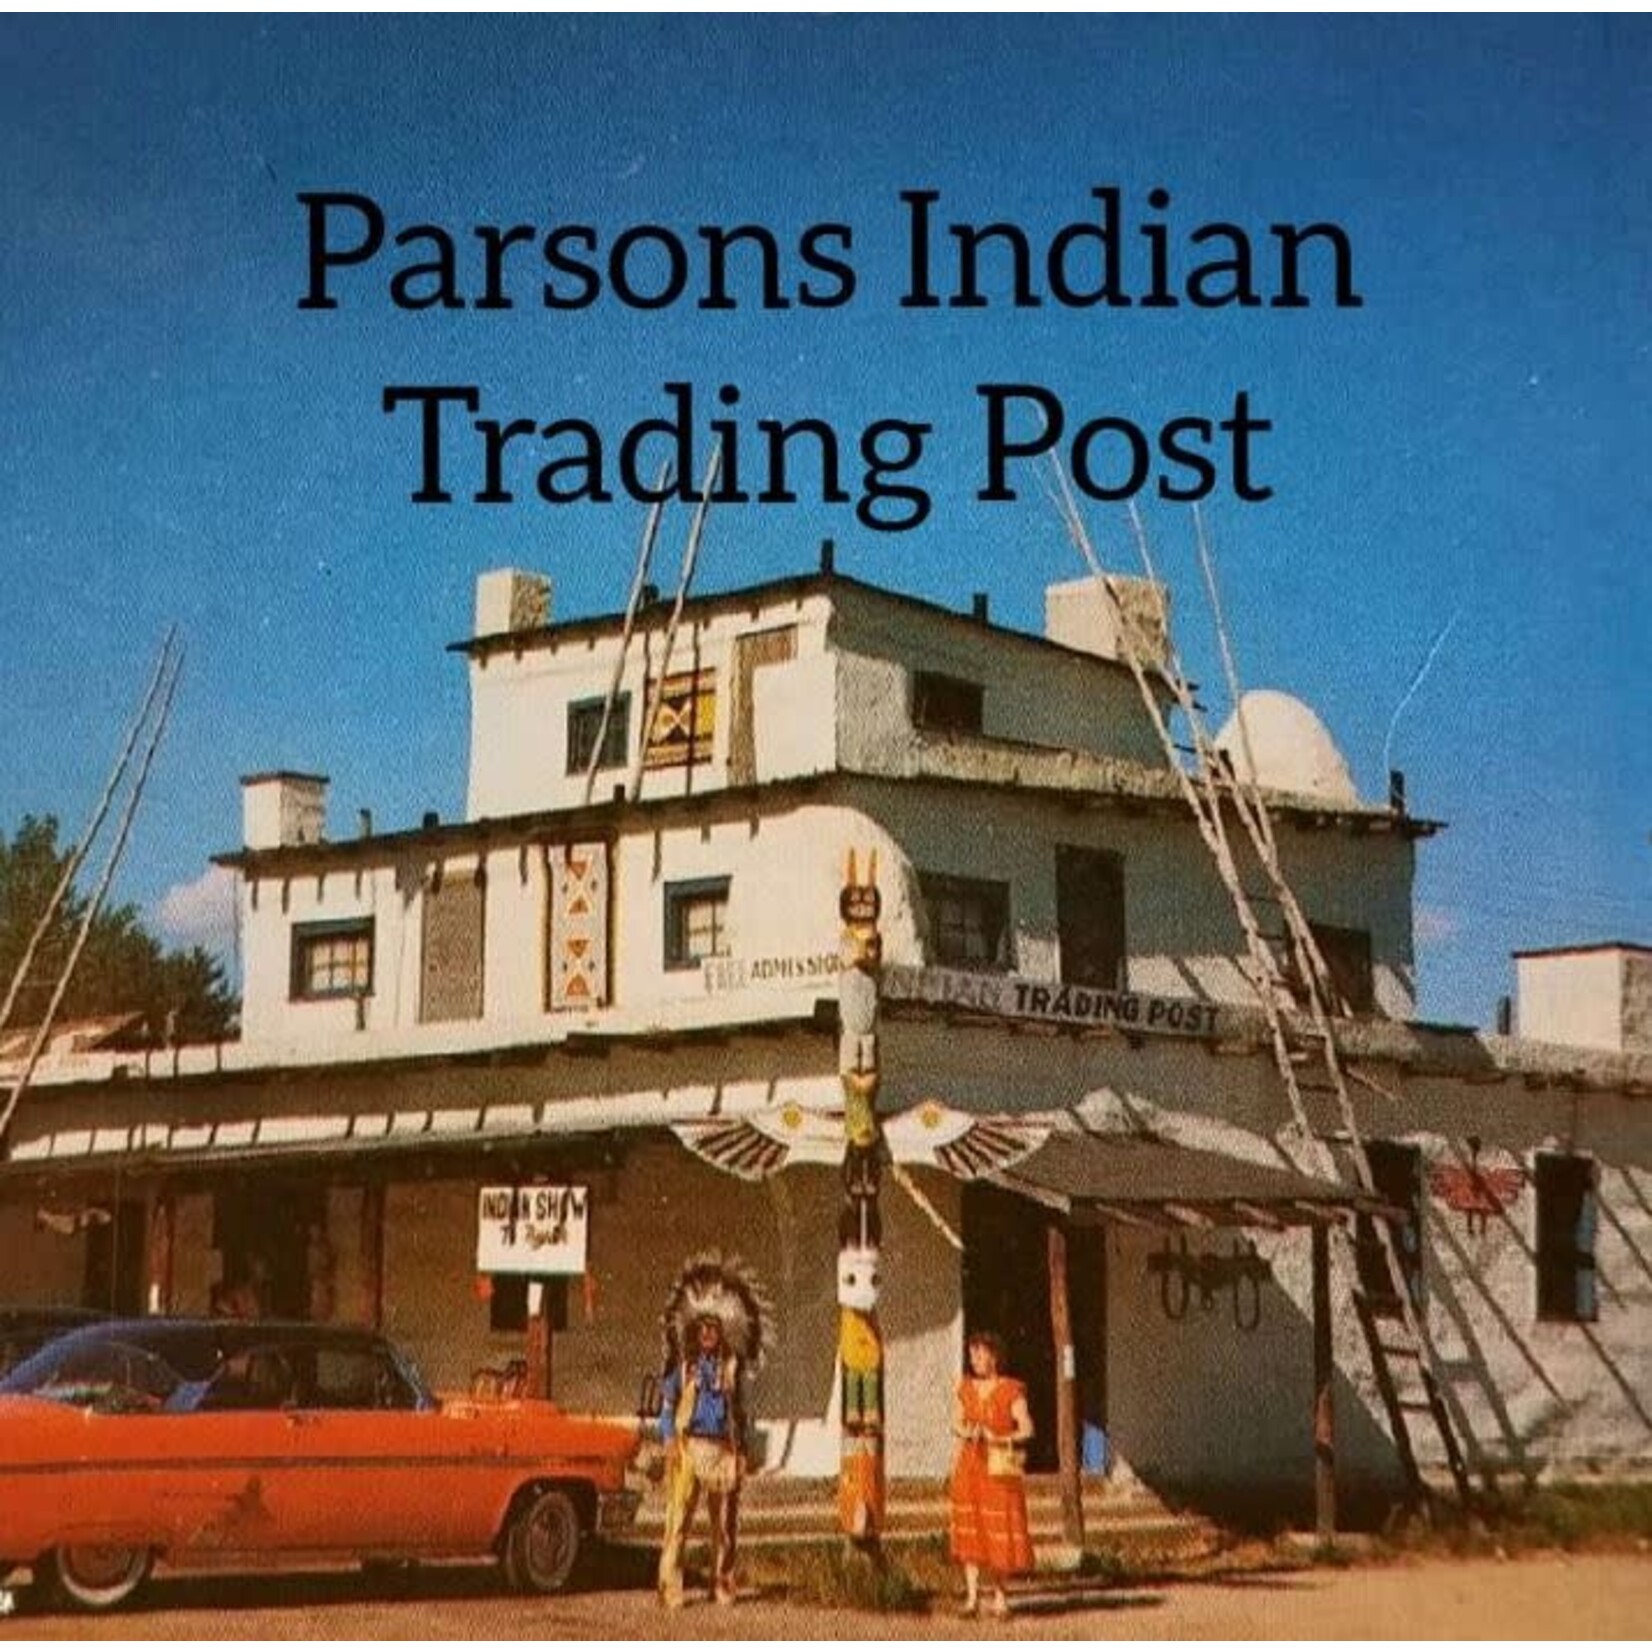 Parson's Indian Trading Post-Wisconsin Dells Parson's Indian Trading Post-Wisconsin Dells $5.00 General Certificate